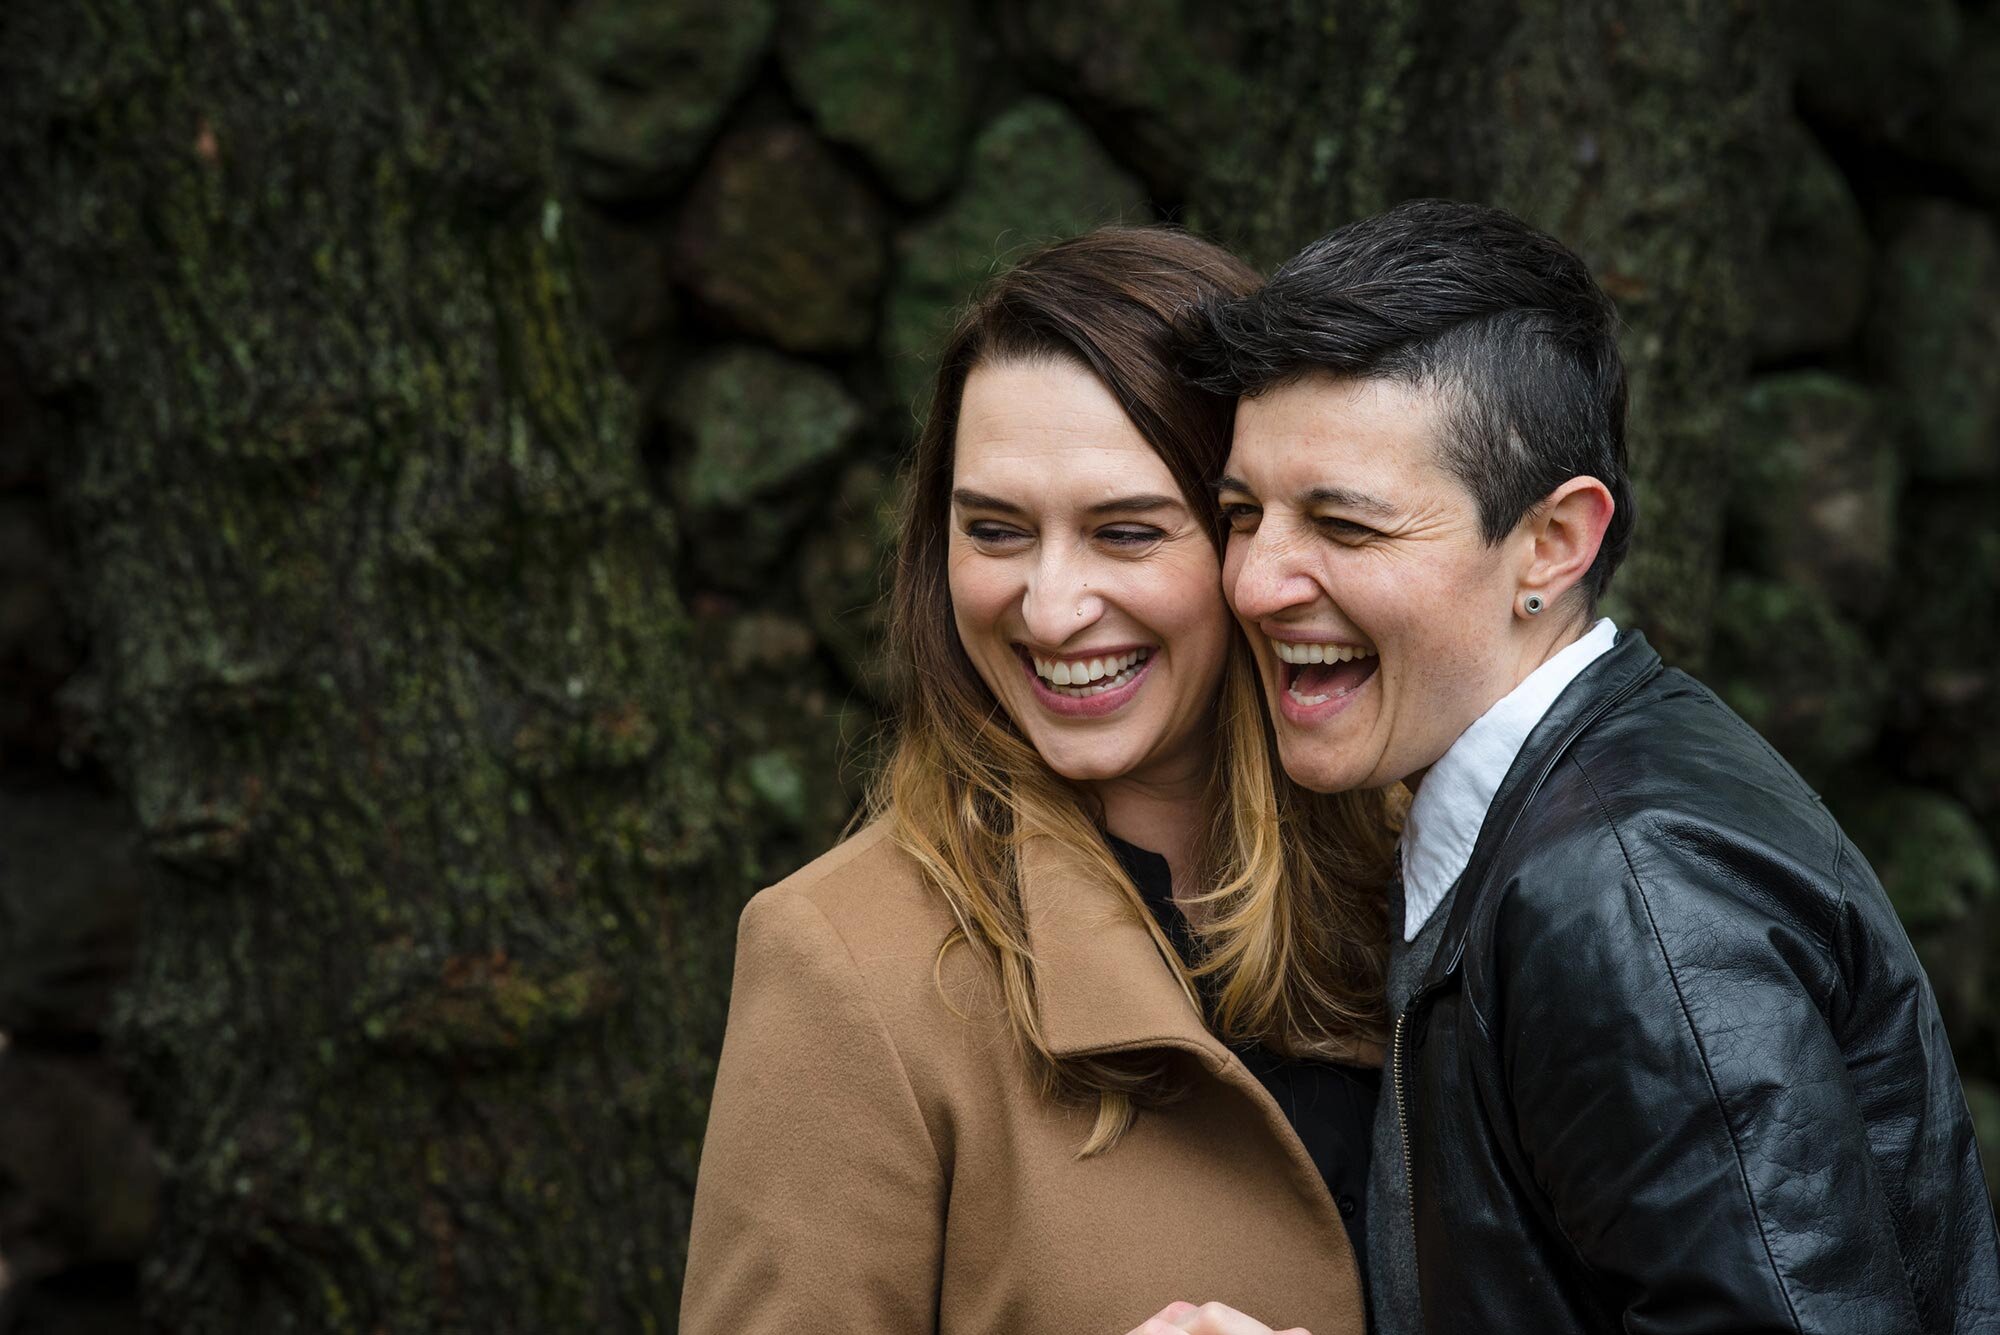 Couple laughs together in front of stone wall during autumn queer family photo session Michelle Schapiro Photography